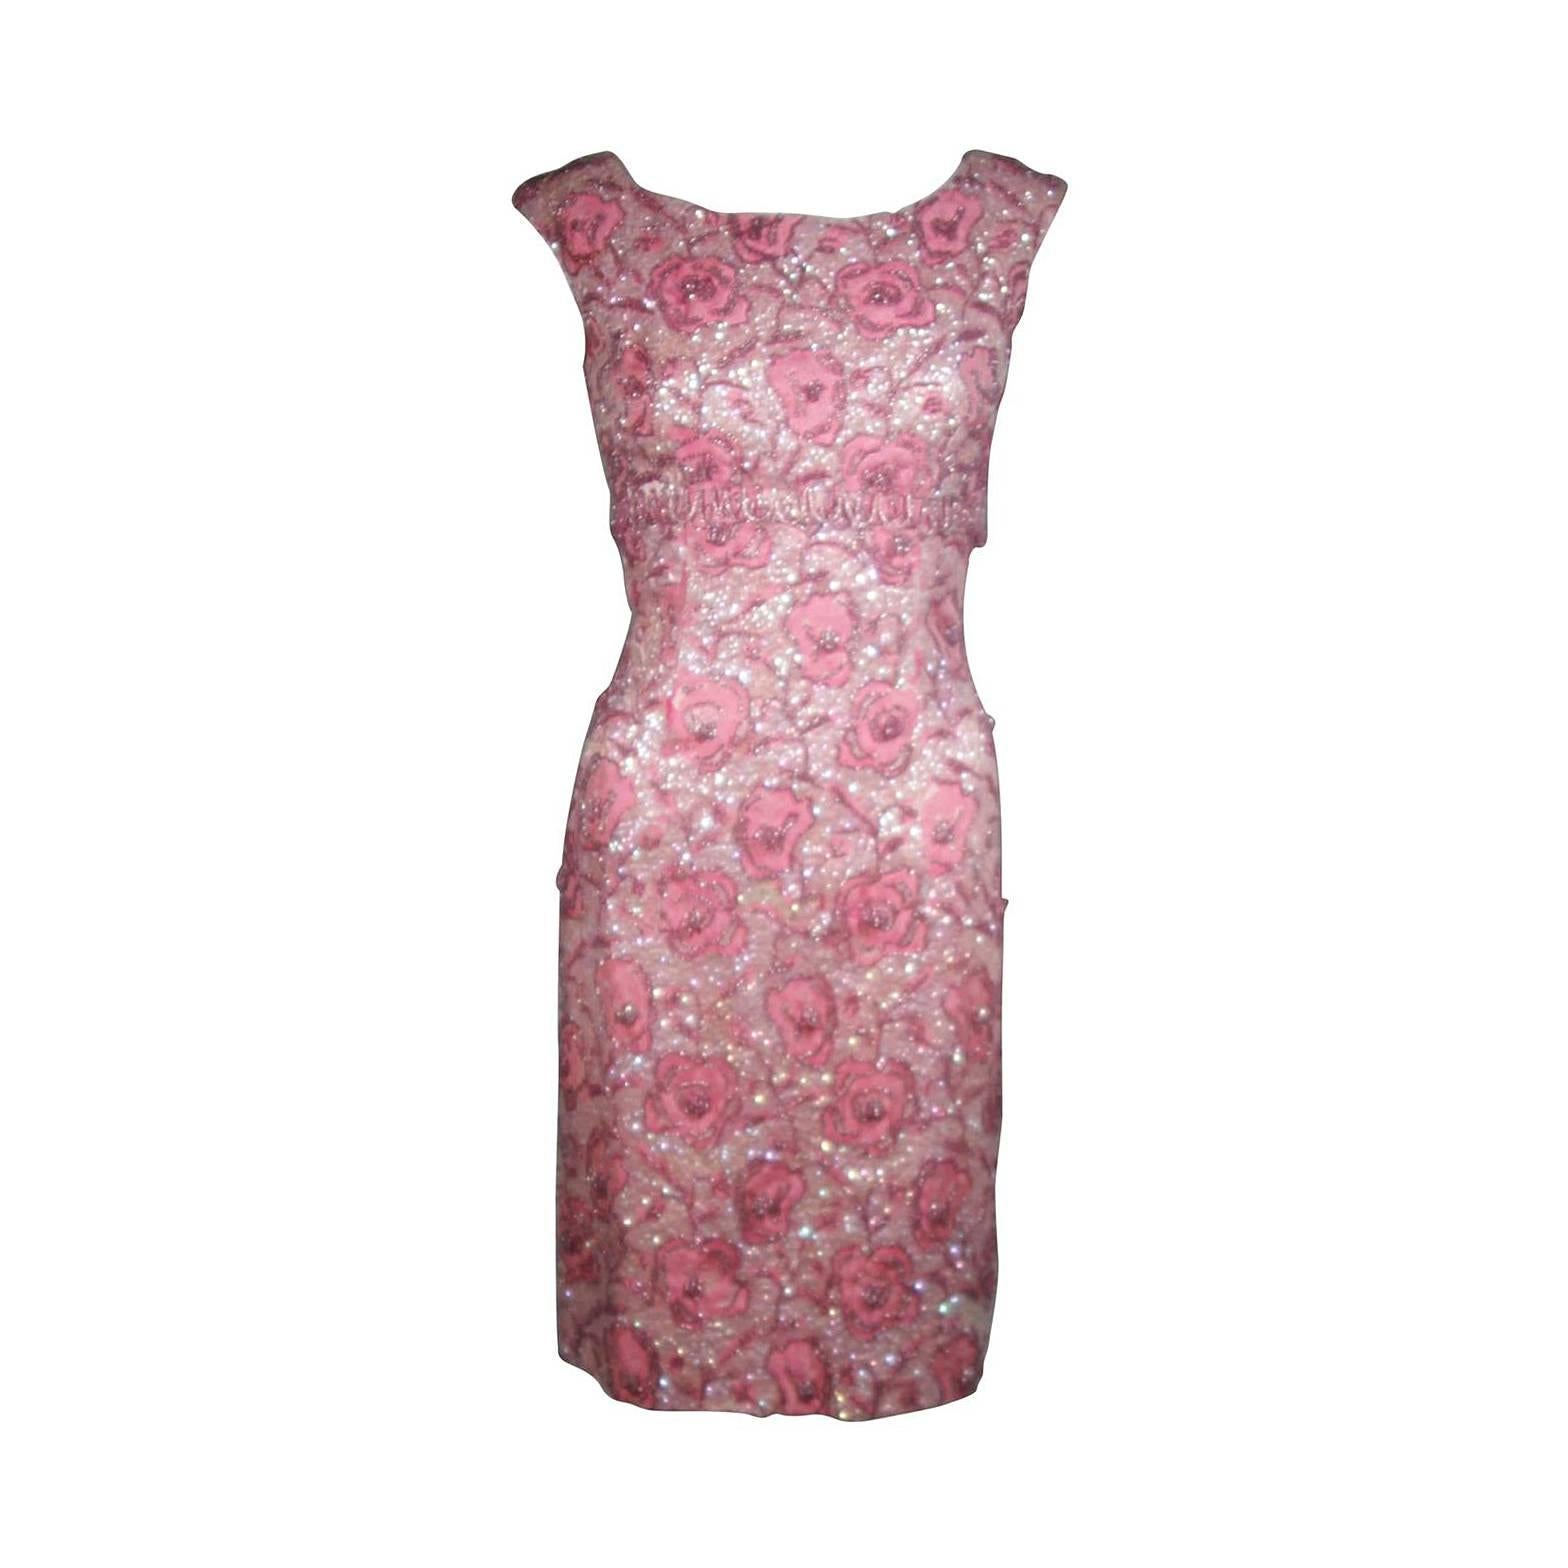 1960's SAKS 5TH AVE Pink Floral Brocade Hand Beaded Cocktail Dress Sz 4